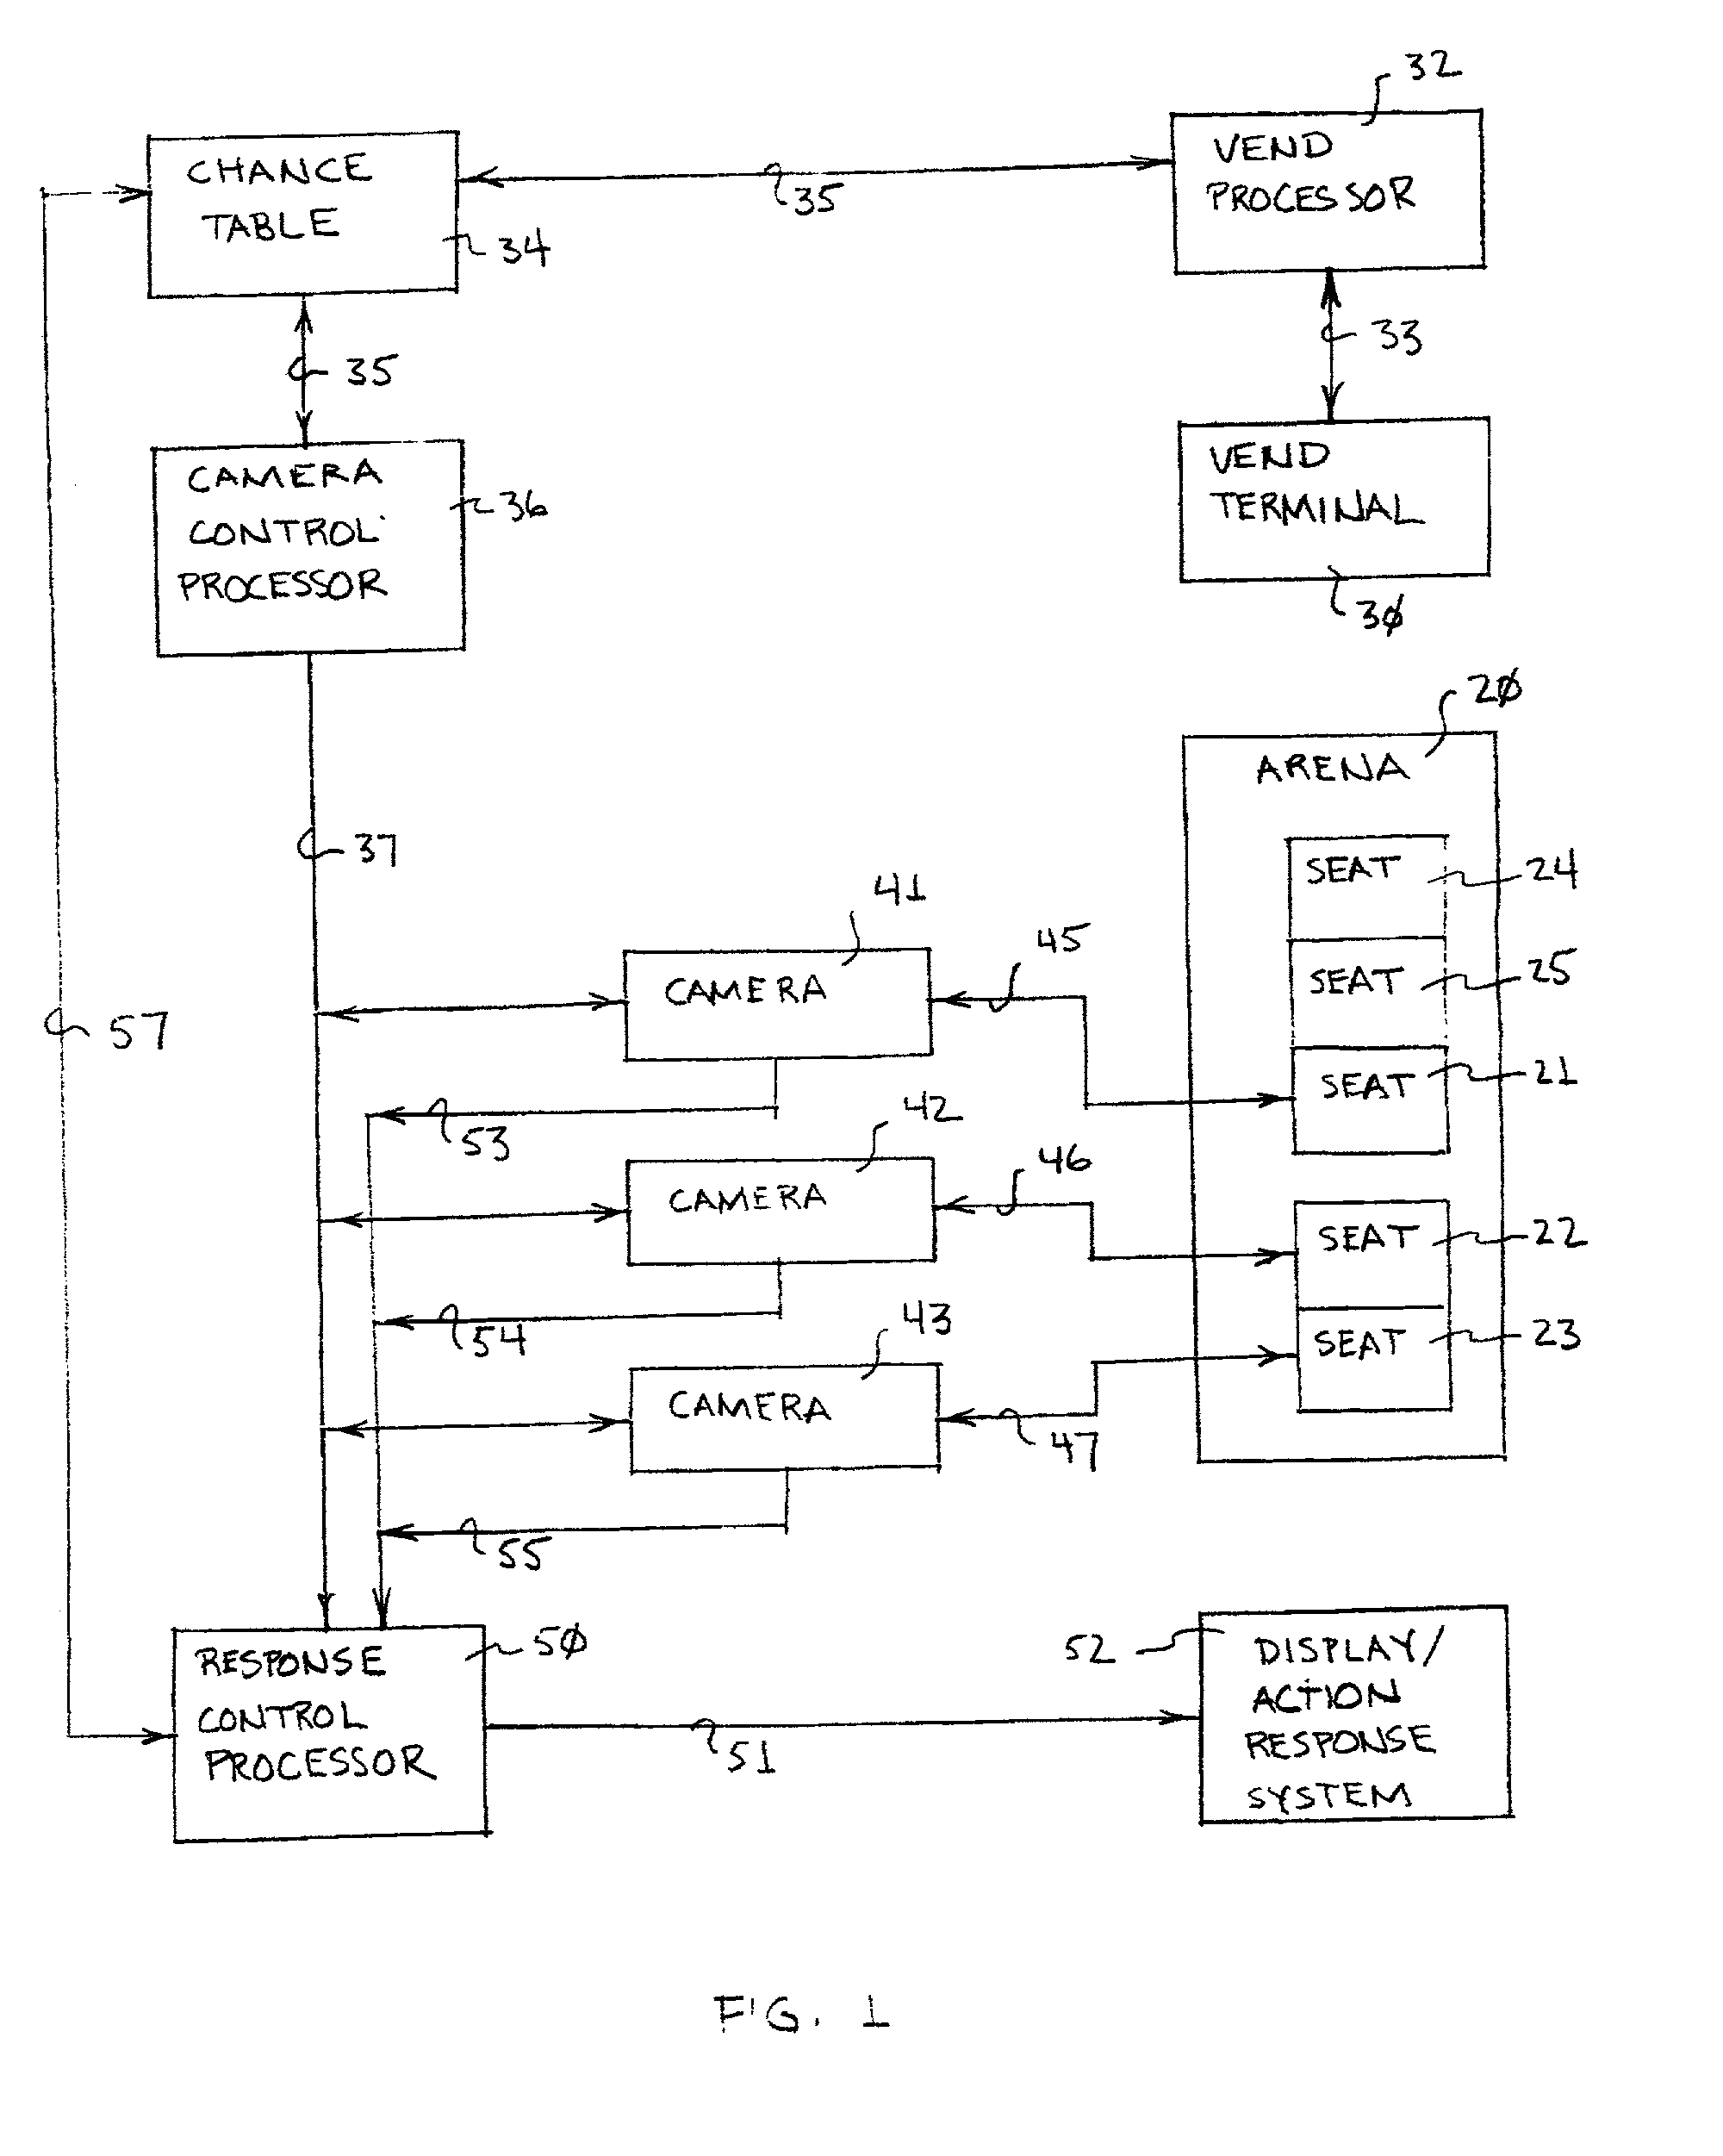 System and method for selecting arena seat locations for display